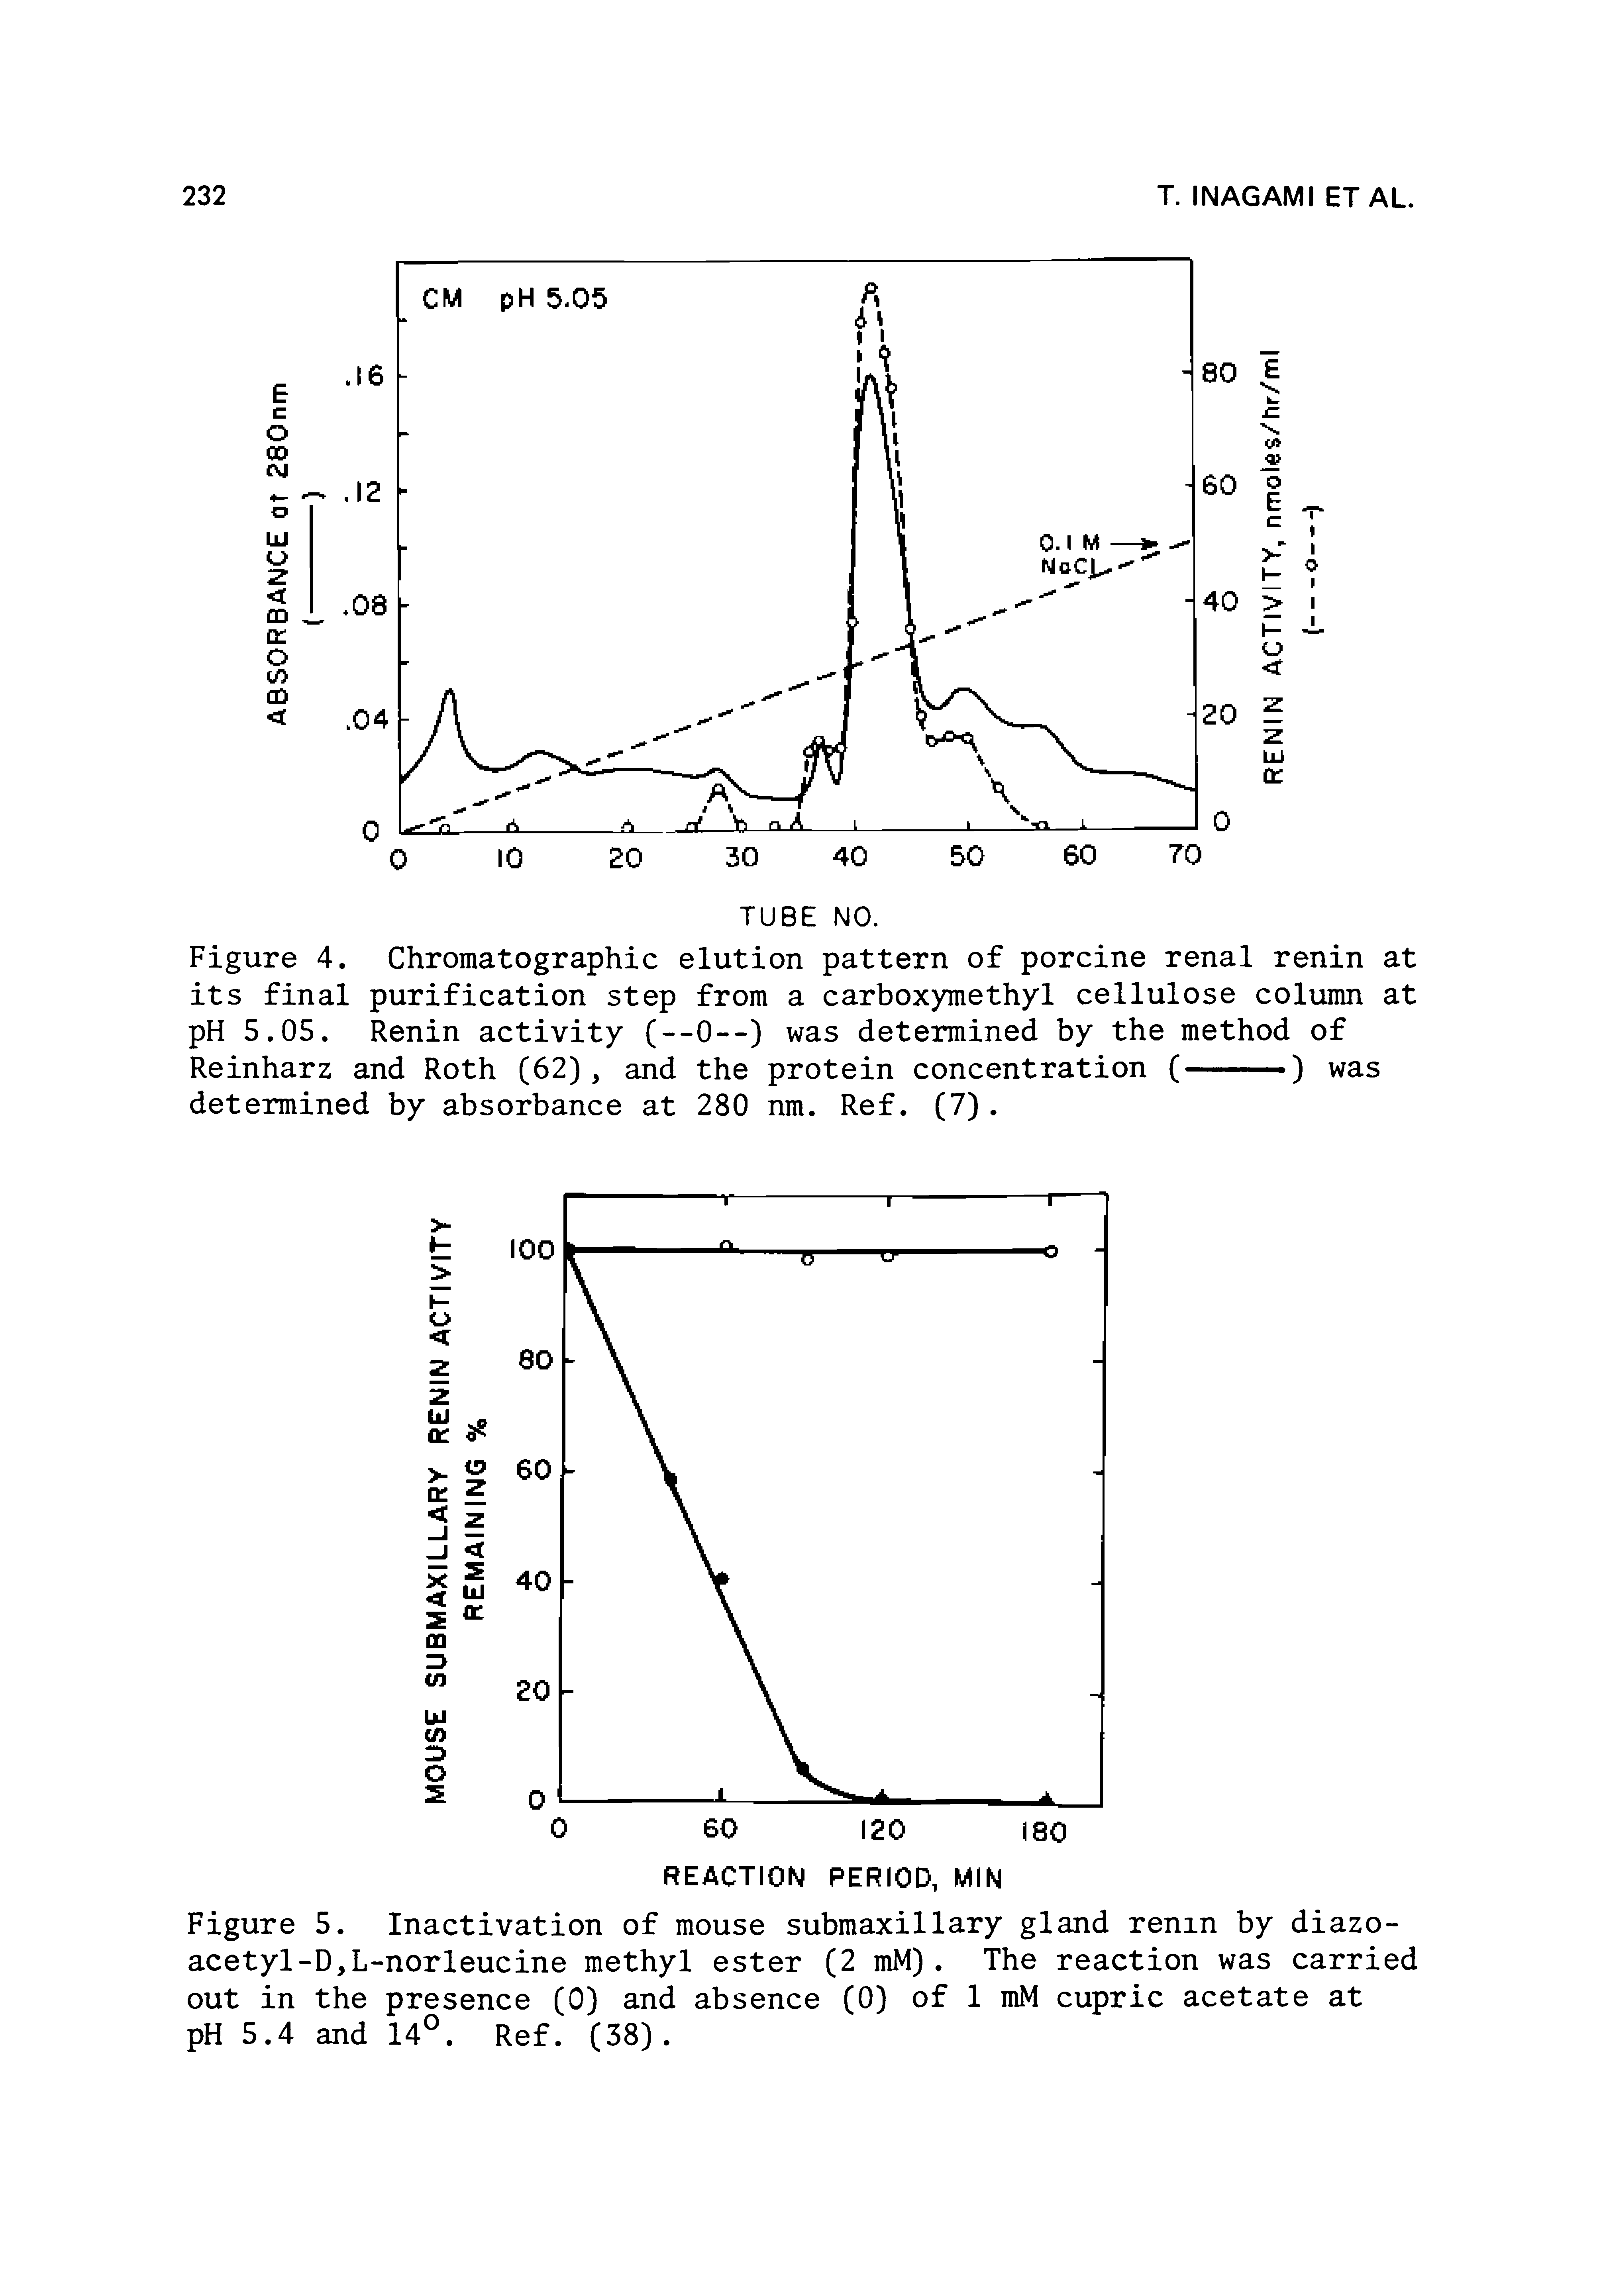 Figure 5. Inactivation of mouse submaxillary gland renin by diazo-acetyl-D,L-norleucine methyl ester (2 mM). The reaction was carried out in the presence (0) and absence (0) of 1 mM cupric acetate at pH 5.4 and 14°. Ref. (38). ...